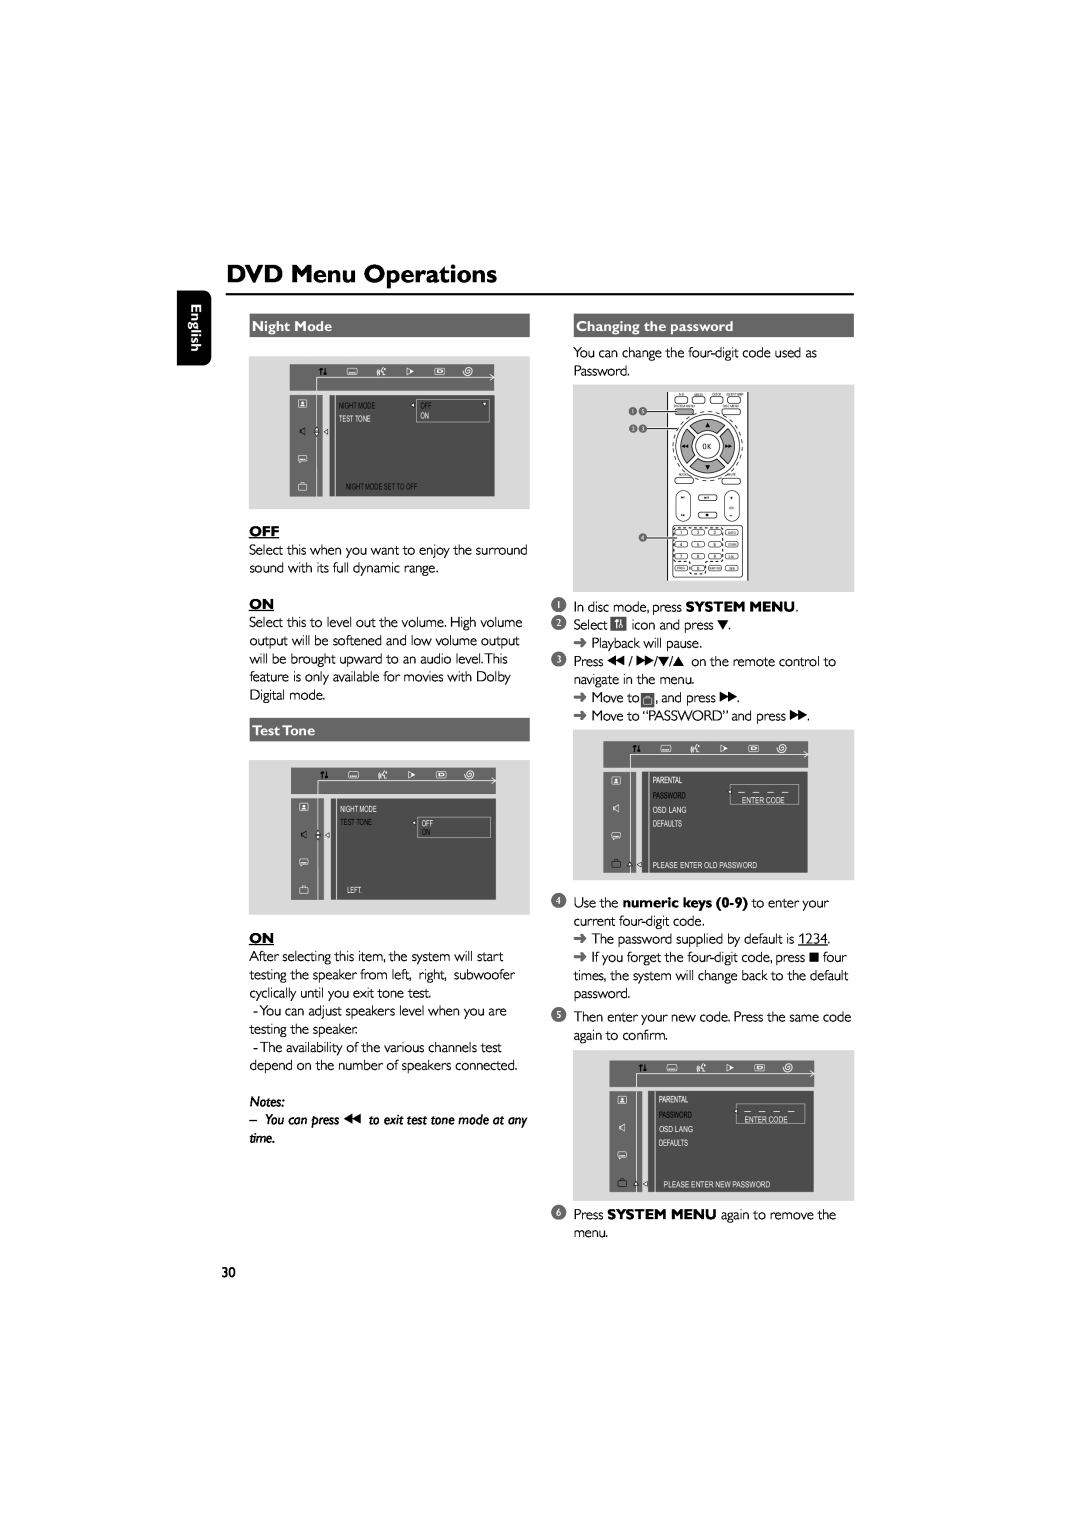 Philips MCD139 owner manual DVD Menu Operations, English, Night Mode, Test Tone, Notes, Changing the password 